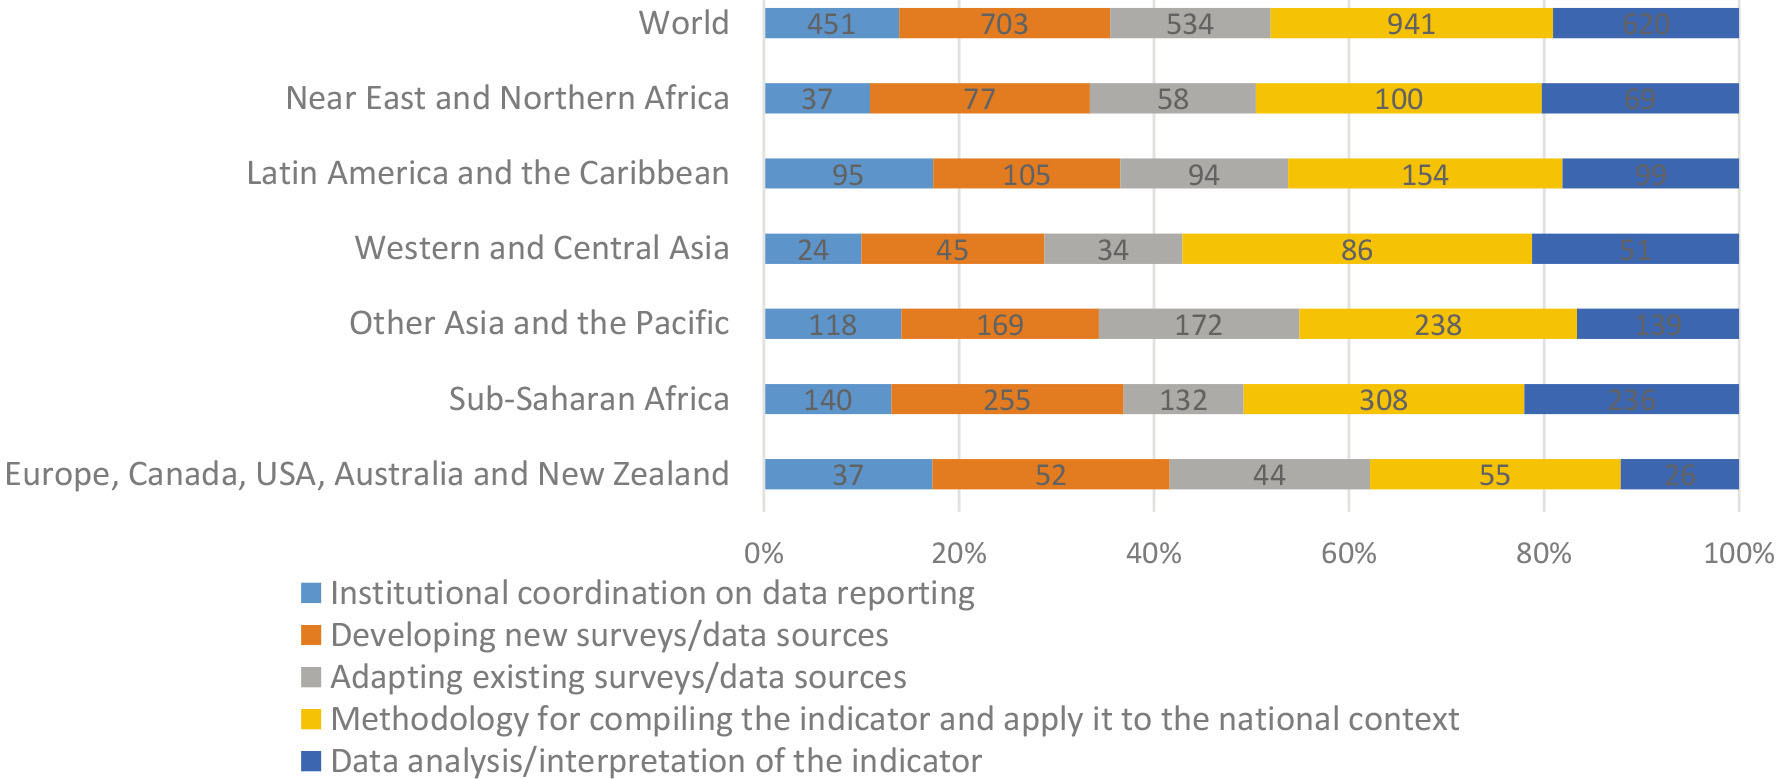 Number of country requests for capacity development support to produce and/or use the SDG indicators under FAO custodianship, per type of support requested and region. Note: During FAO’s assessment, countries were invited to express their needs for up to 3 type of priority support per indicator. The total number of country requests per type of support requested therefore reflects the sum of all support identified as top priority across all 21 SDG indicators under FAO custodianship. For each region, the distribution of the number of requests was stacked to 100% to facilitate the comparison between regions (Source: FAO, Statistical capacity assessment for the FAO-relevant SDG indicators, 2019).